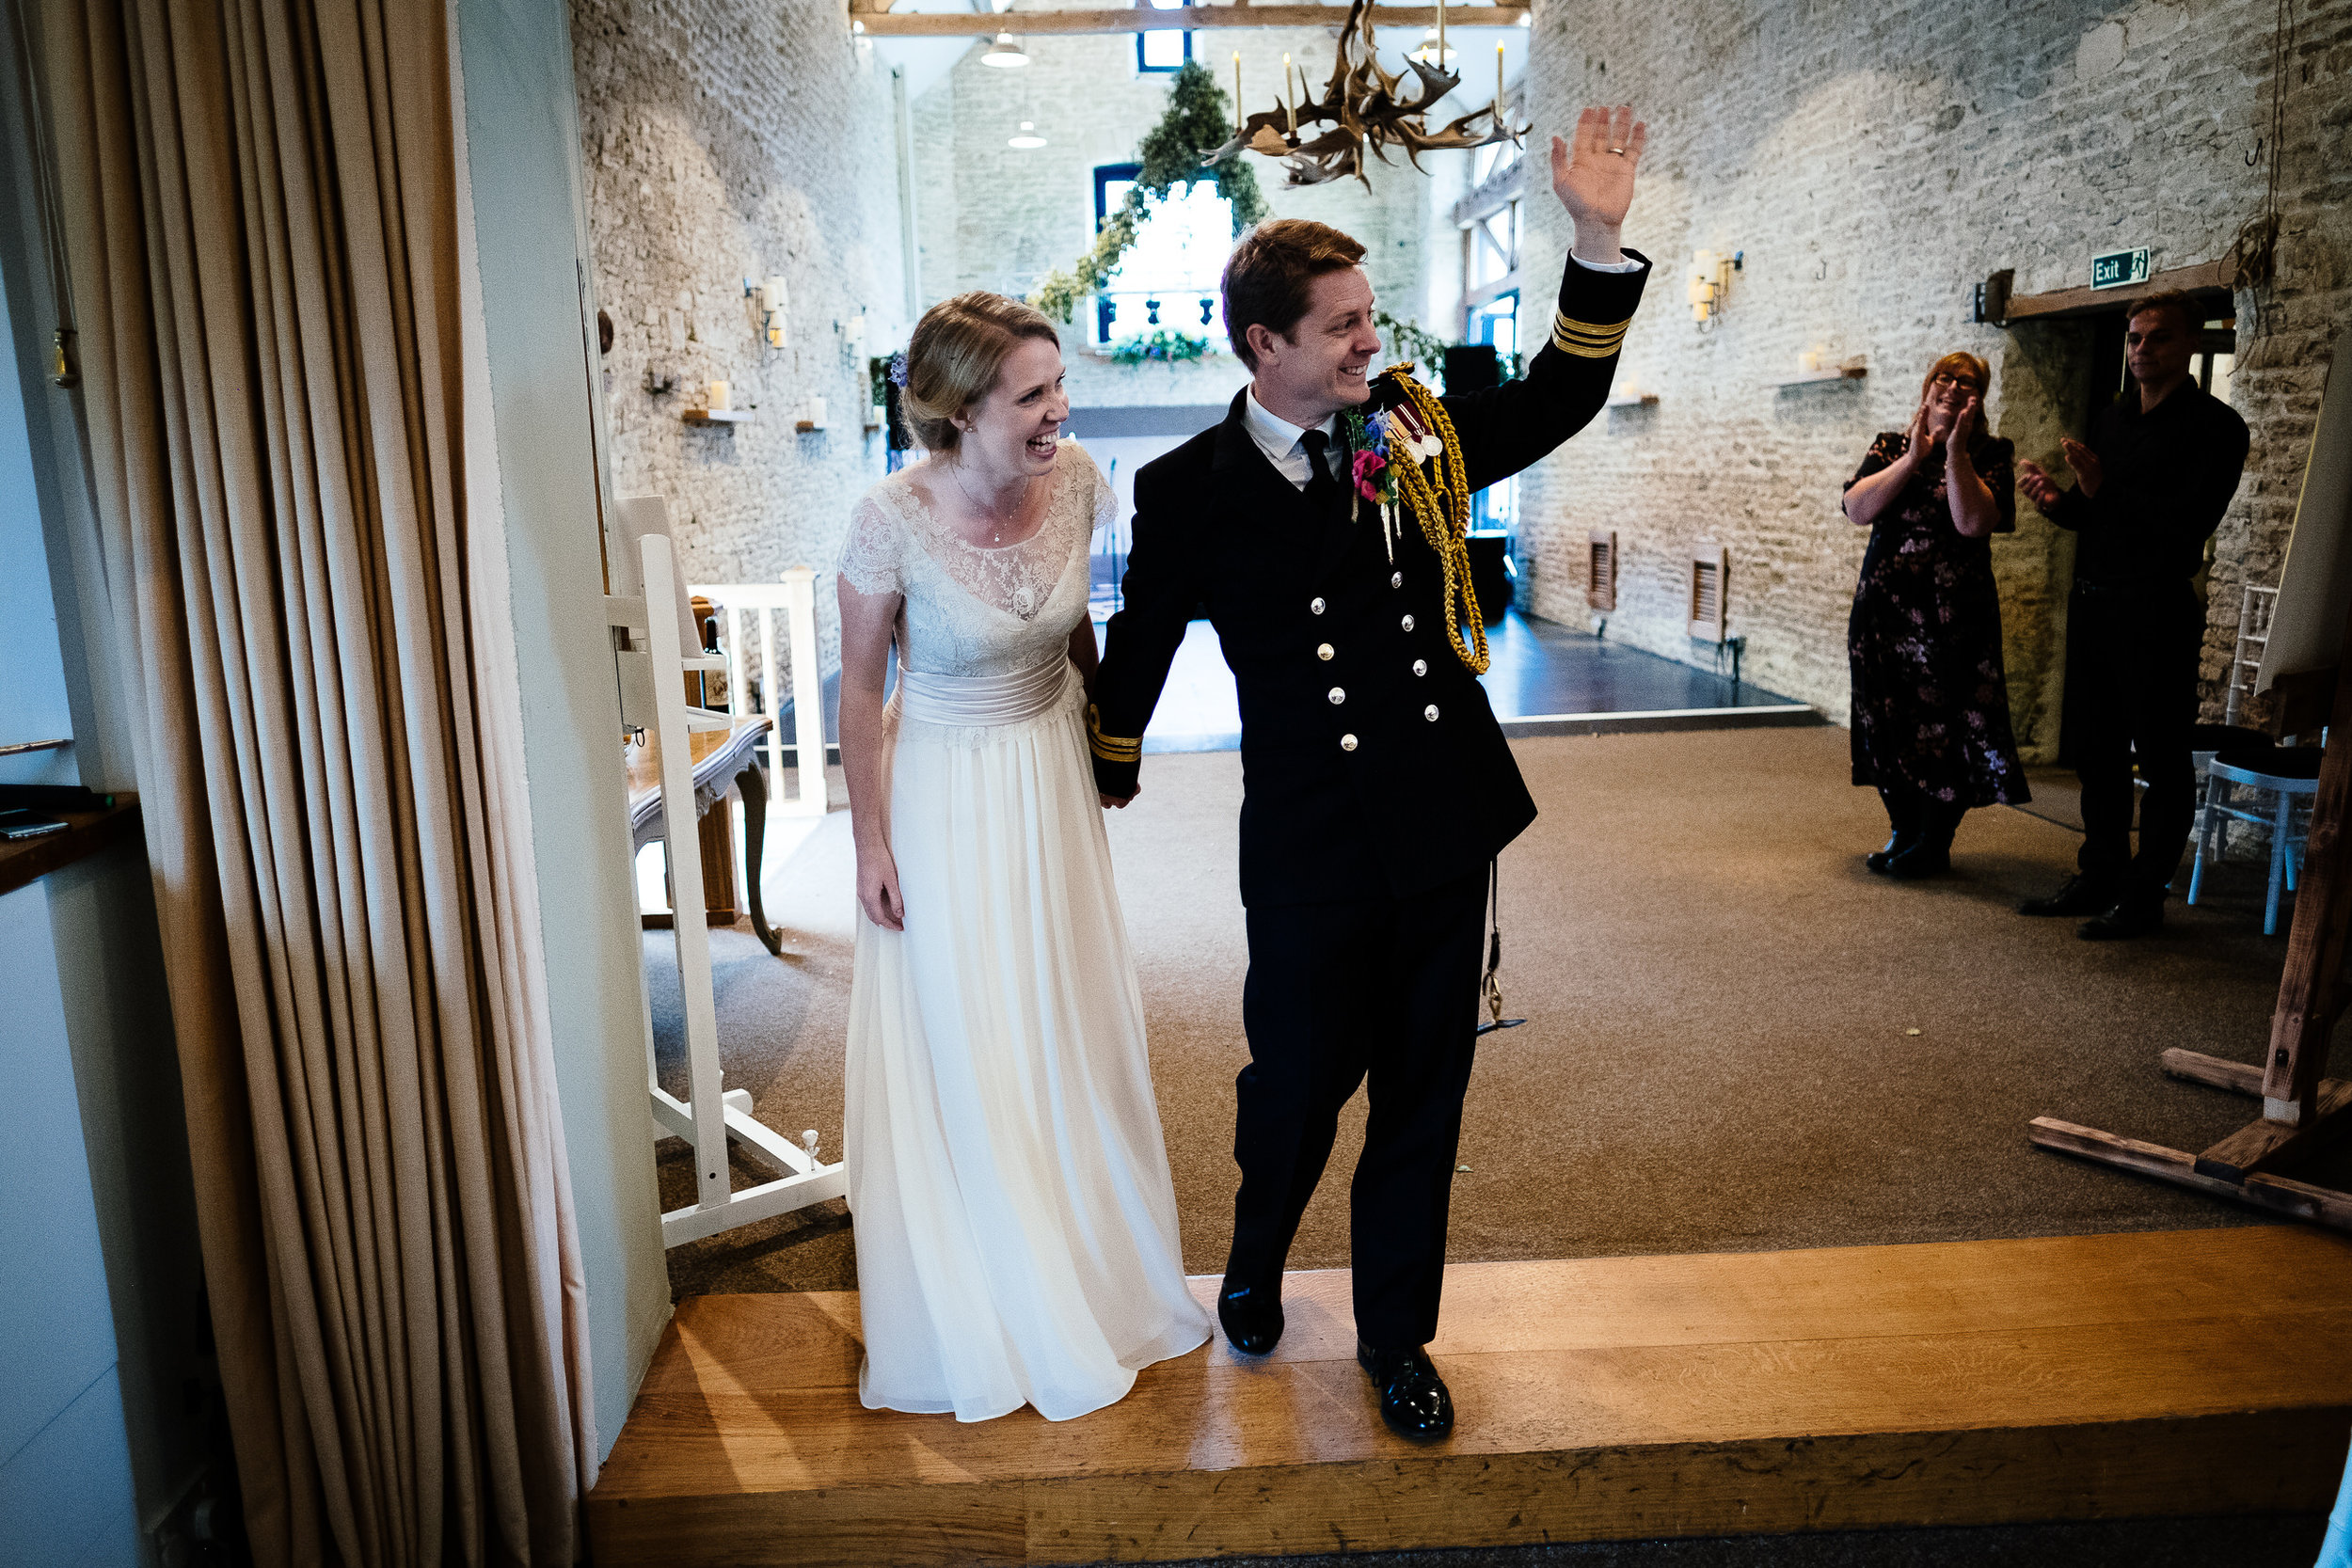 A bride and groom entering the room at a wedding at Merriscourt Wedding Venue, Oxfordshire